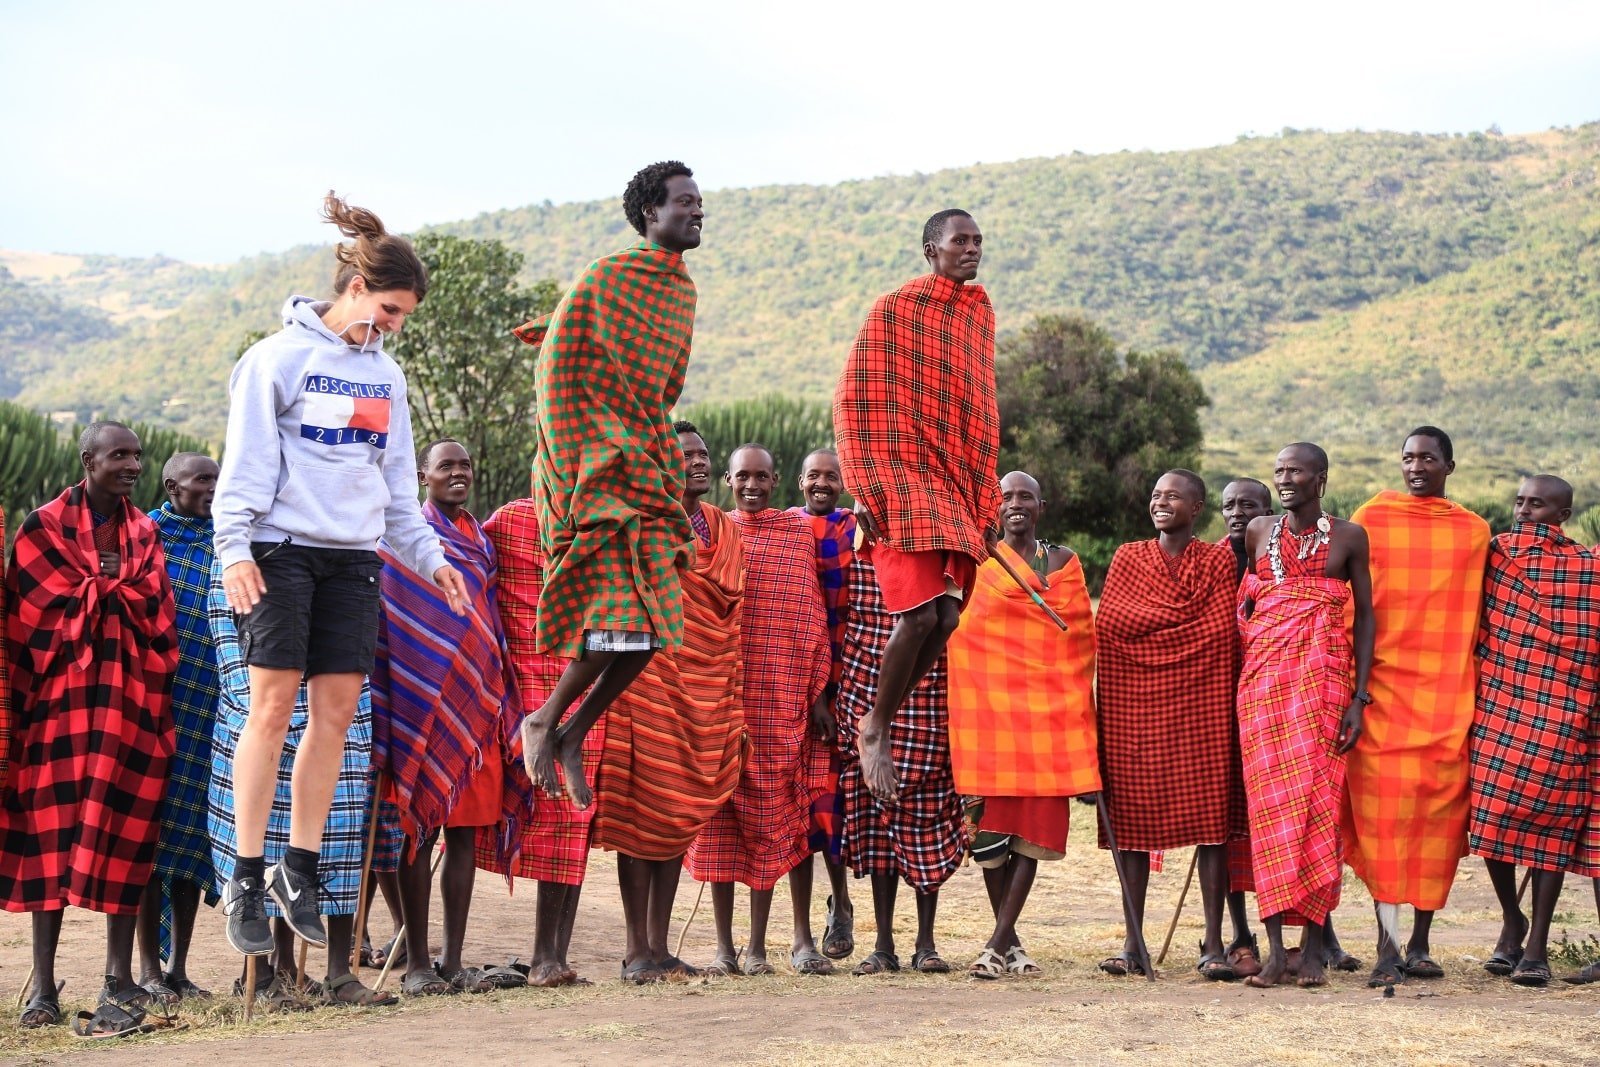 <p><span>In Kenya, community-based tourism takes a front seat in wildlife conservation efforts. Projects like the Maasai Mara Wildlife Conservancies involve local communities in protecting the region’s iconic wildlife. As a visitor, you can participate in guided safaris led by local Maasai guides who share their in-depth knowledge of the ecosystem.</span></p> <p><span>Your visit contributes to the conservancies’ efforts to protect species like lions, elephants, and rhinos. Additionally, many of these projects offer cultural experiences, such as village visits and traditional dance performances, providing a holistic understanding of the Maasai community’s way of life.</span></p> <p><b>Insider’s Tip: </b><span>Opt for lodges or camps that are part of the conservancy program, ensuring your stay directly benefits local conservation efforts.</span></p>